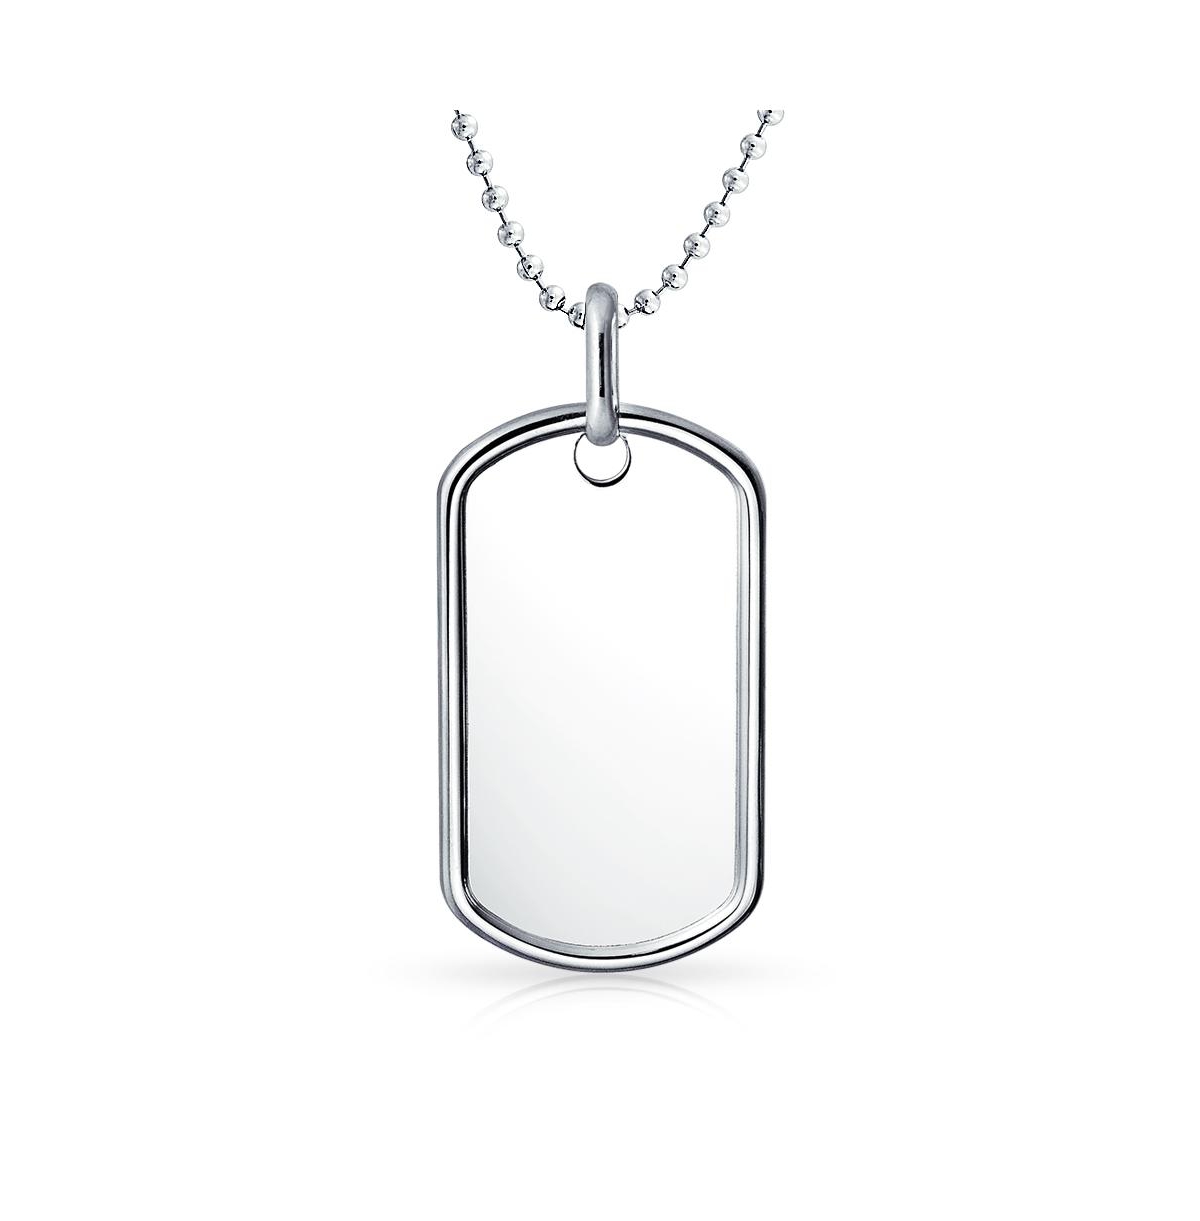 Traditional Mens Large Army Military Dog Tag Pendant Necklace For Men Teens .925 Sterling Silver Long Bead Ball Chain 16 Inch - Silver